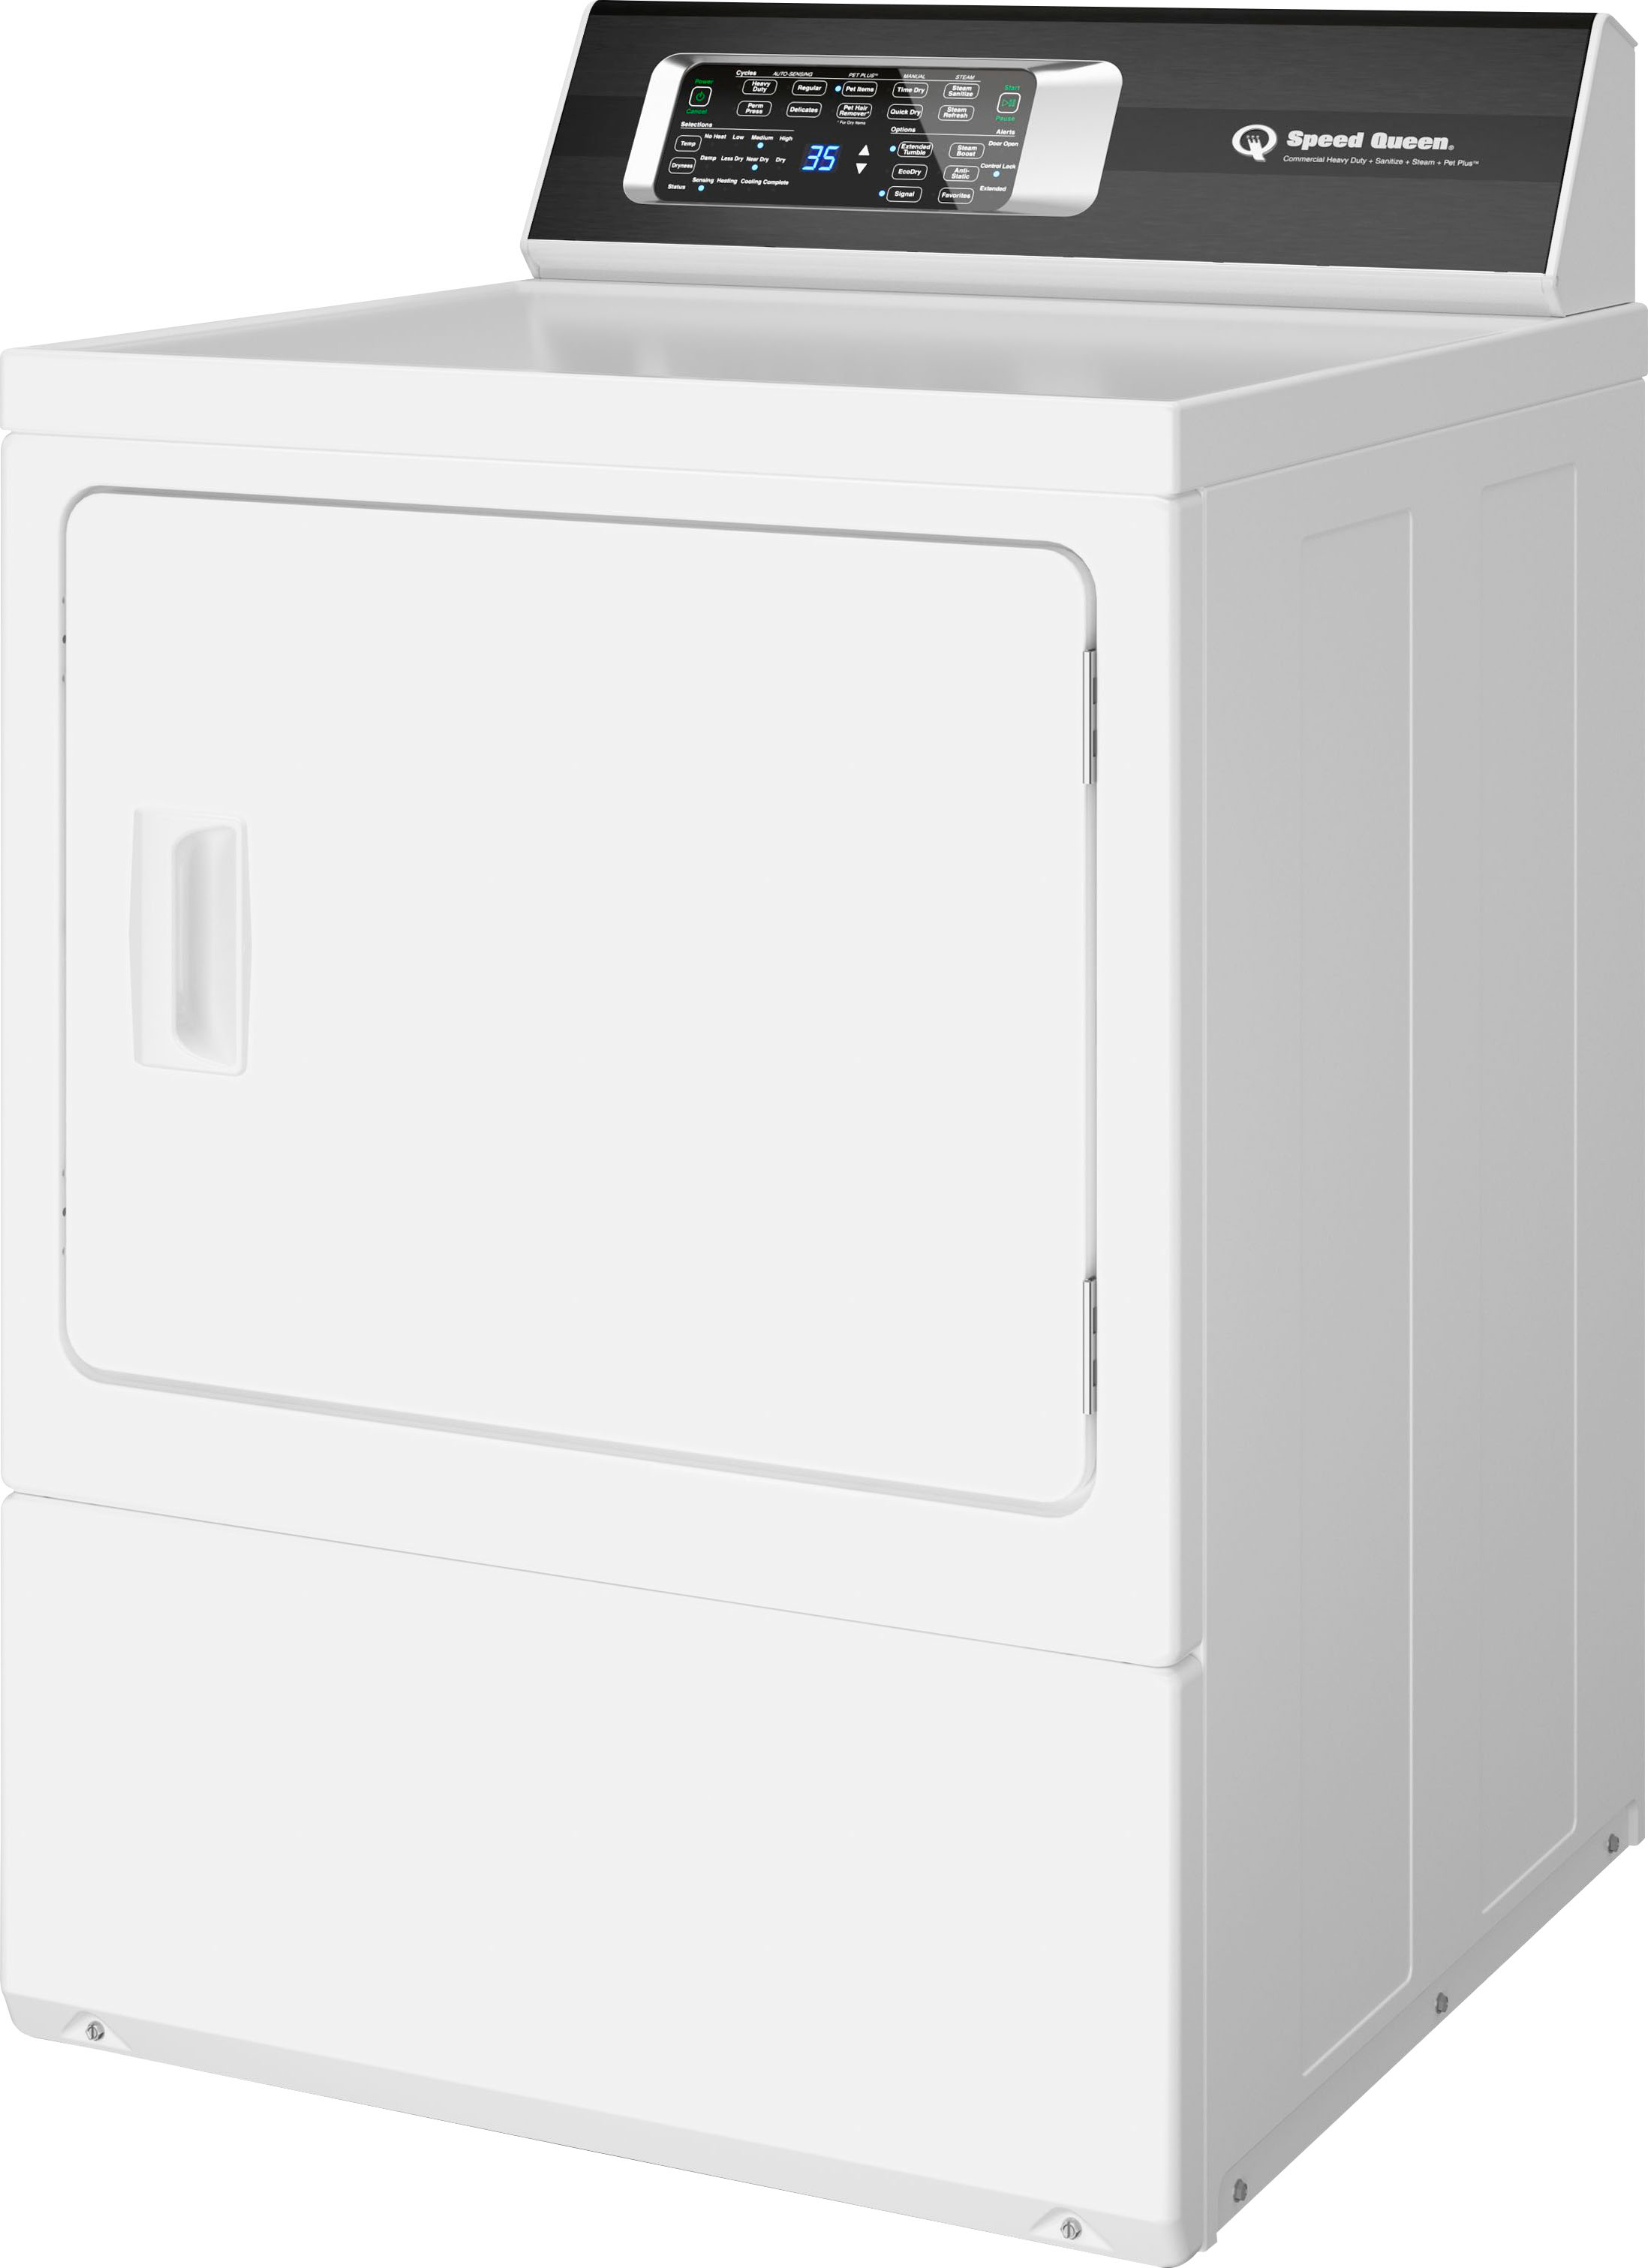 Angle View: Speed Queen - DR7 PET FRIENDLY SANITIZING GAS DRYER - White